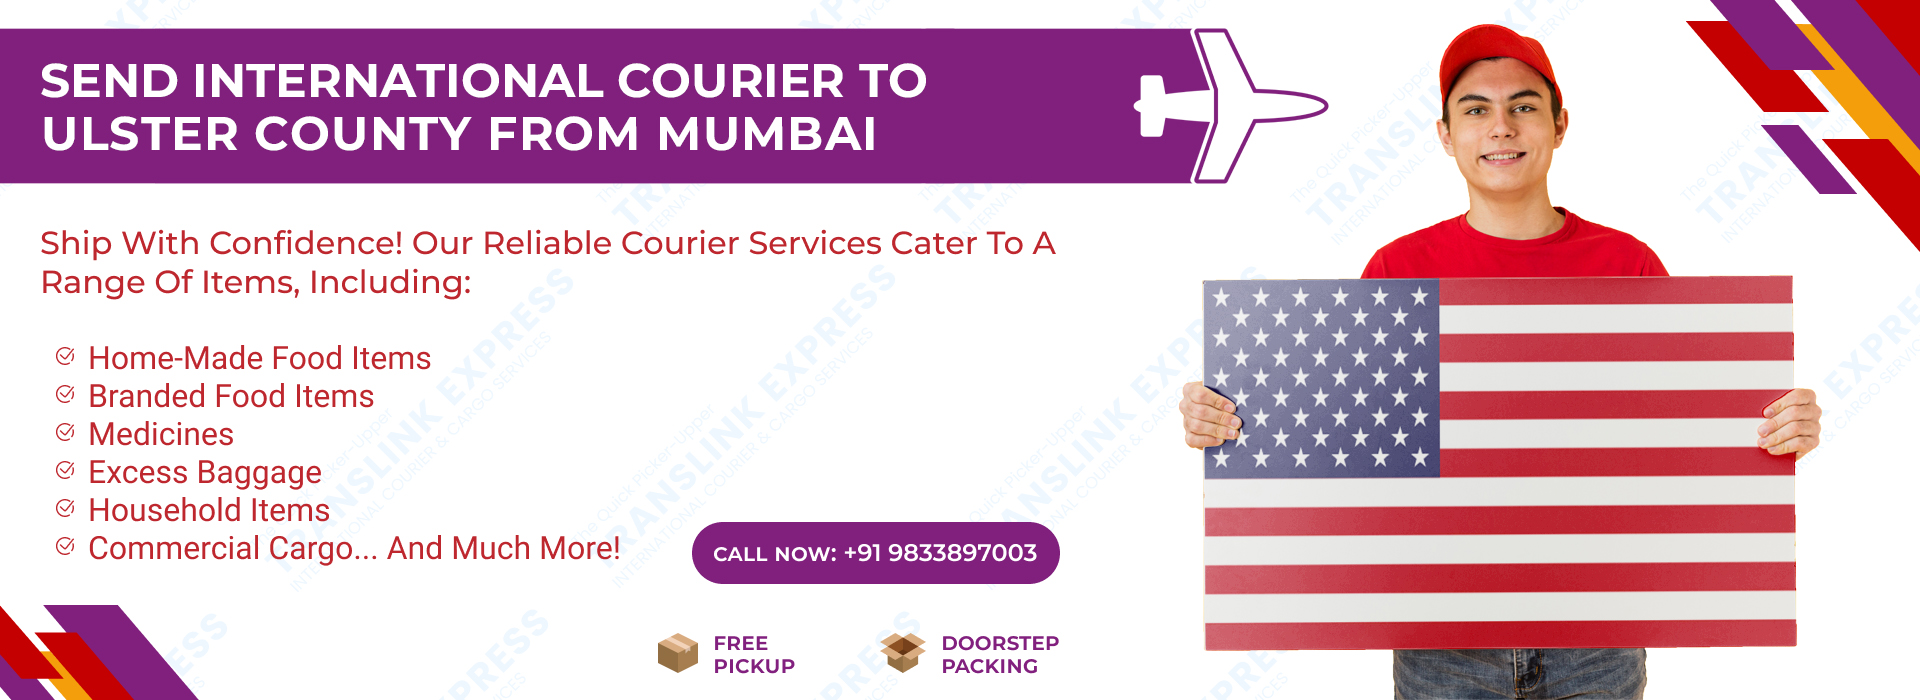 Courier to Ulster County From Mumbai